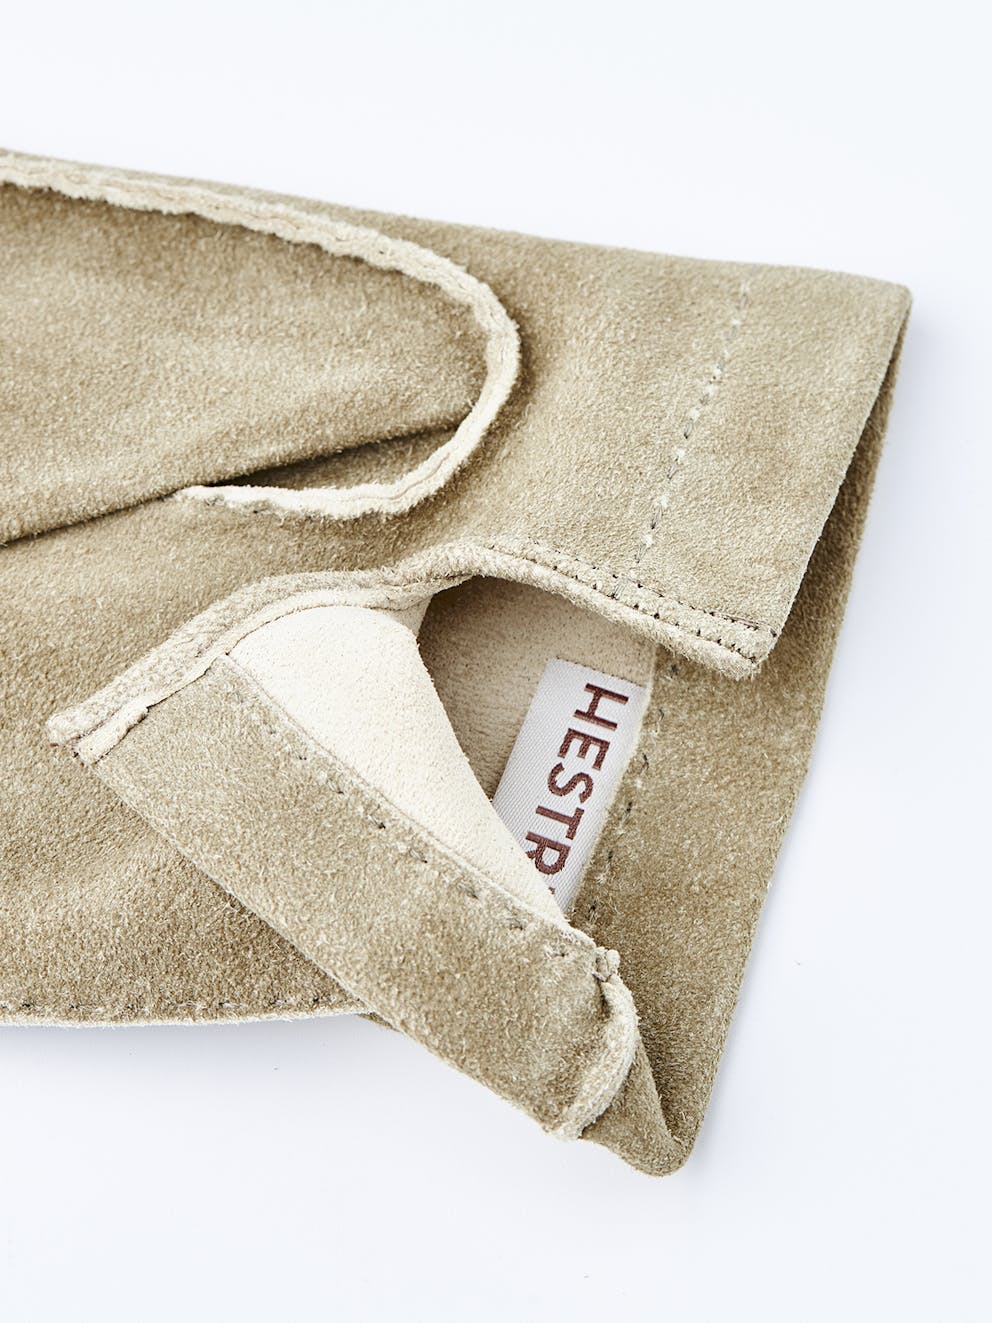 Chamois Handsewn Unlined - Sand | Hestra Gloves